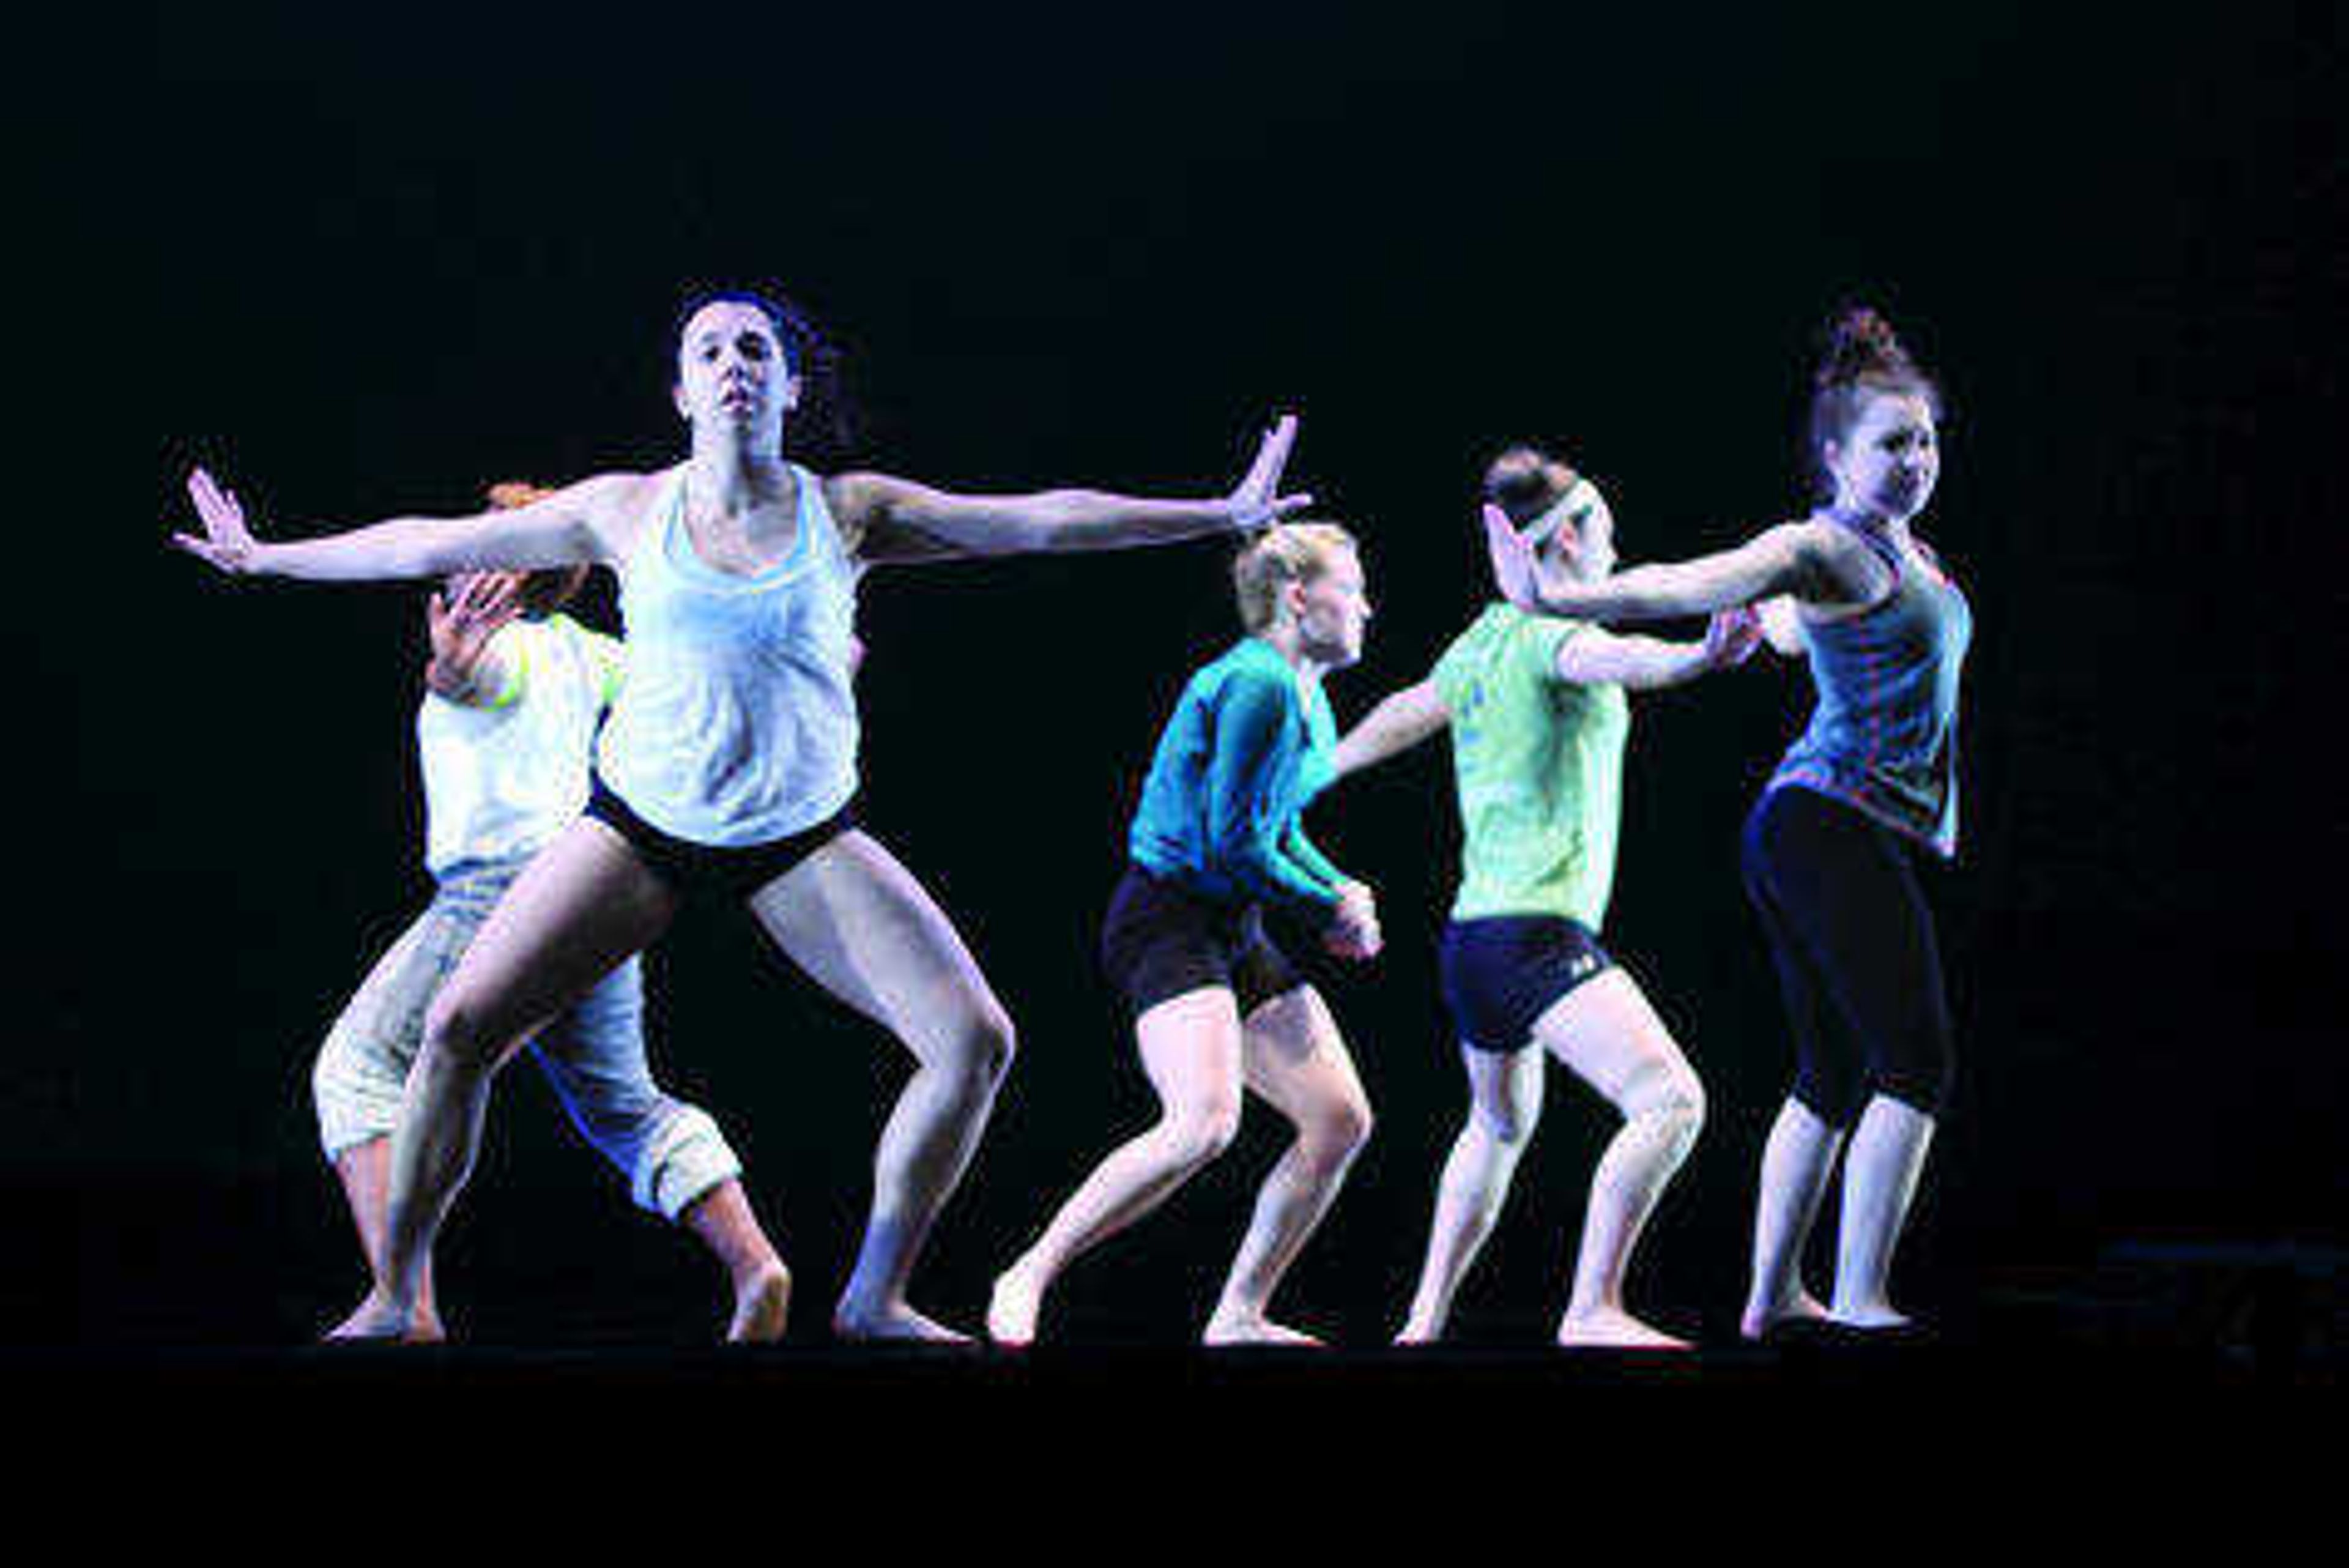 Southeast dancers present work at annual show